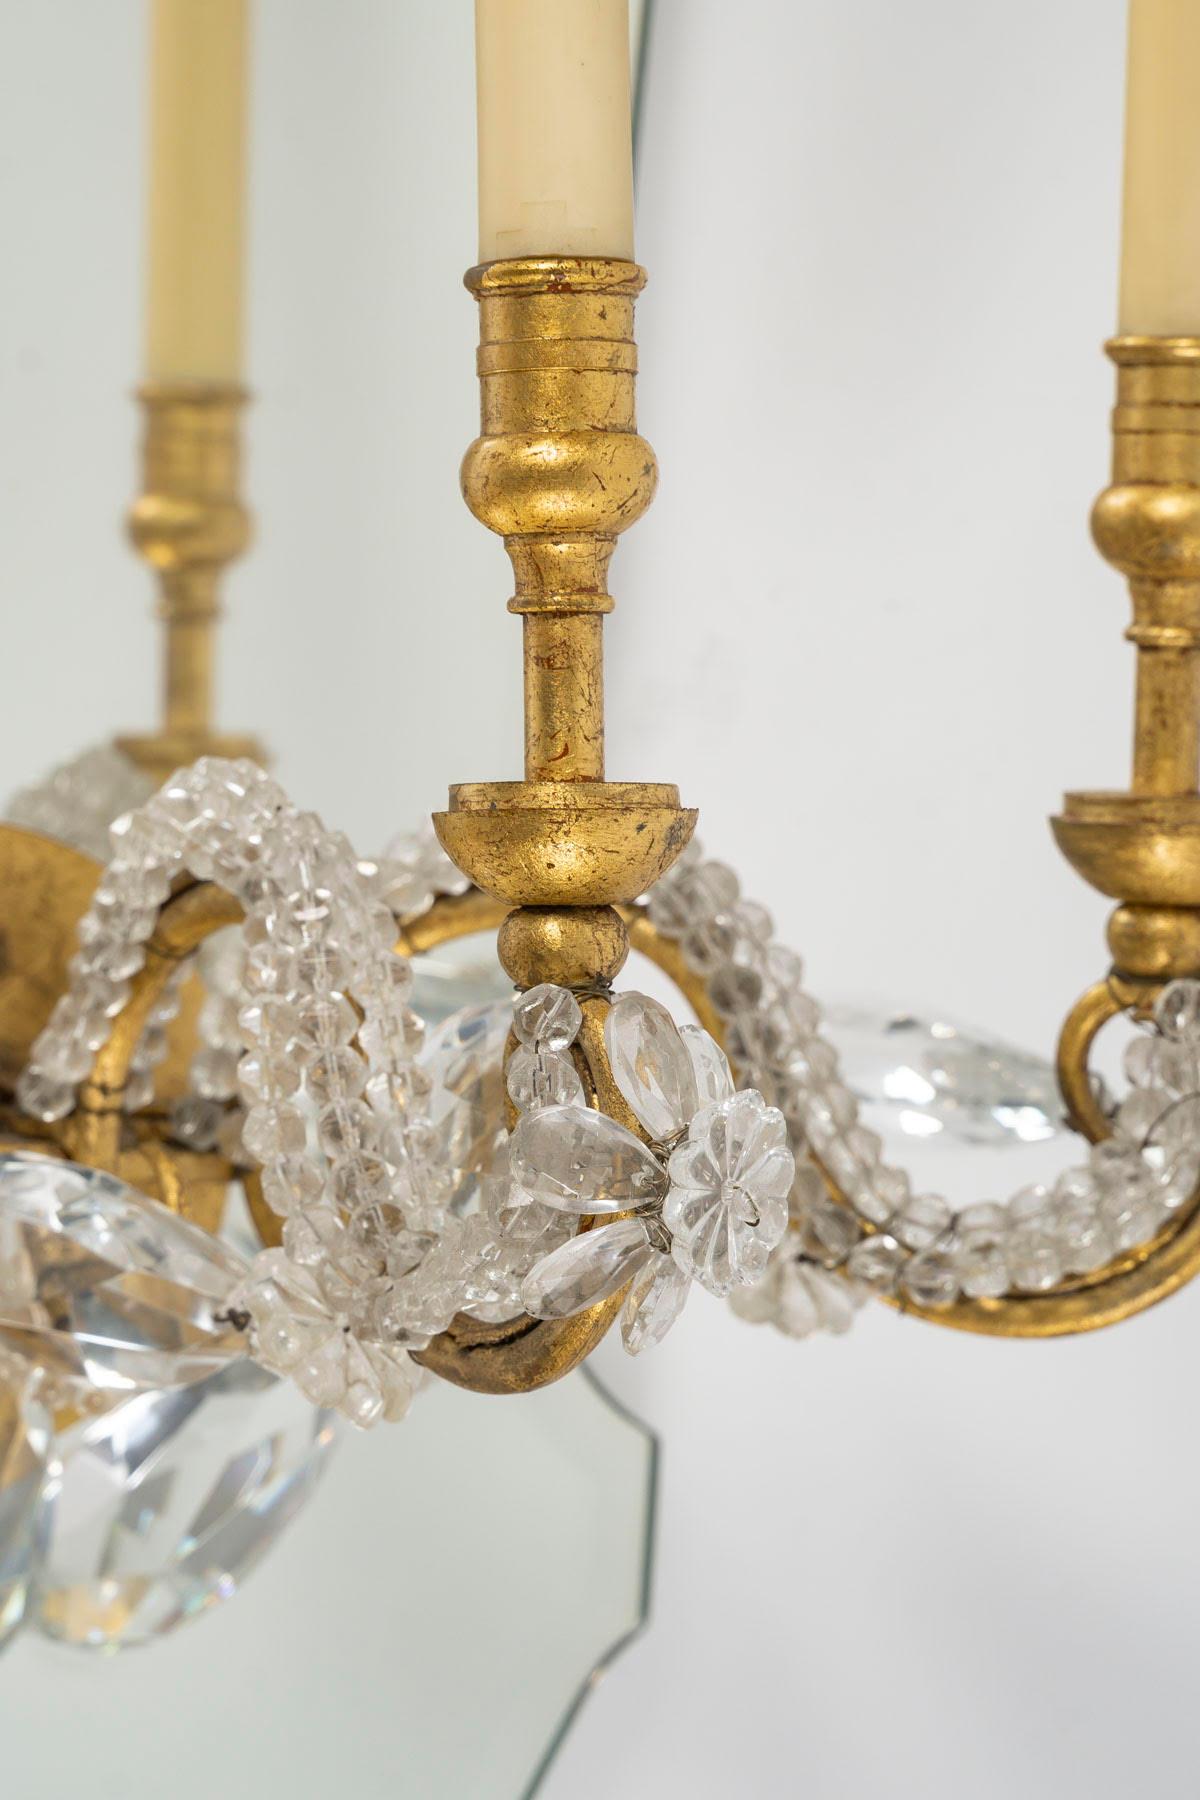 Gilt Suite of 4 Gilded Iron and Mirror Sconces with Glass Drops, 1950-1960.